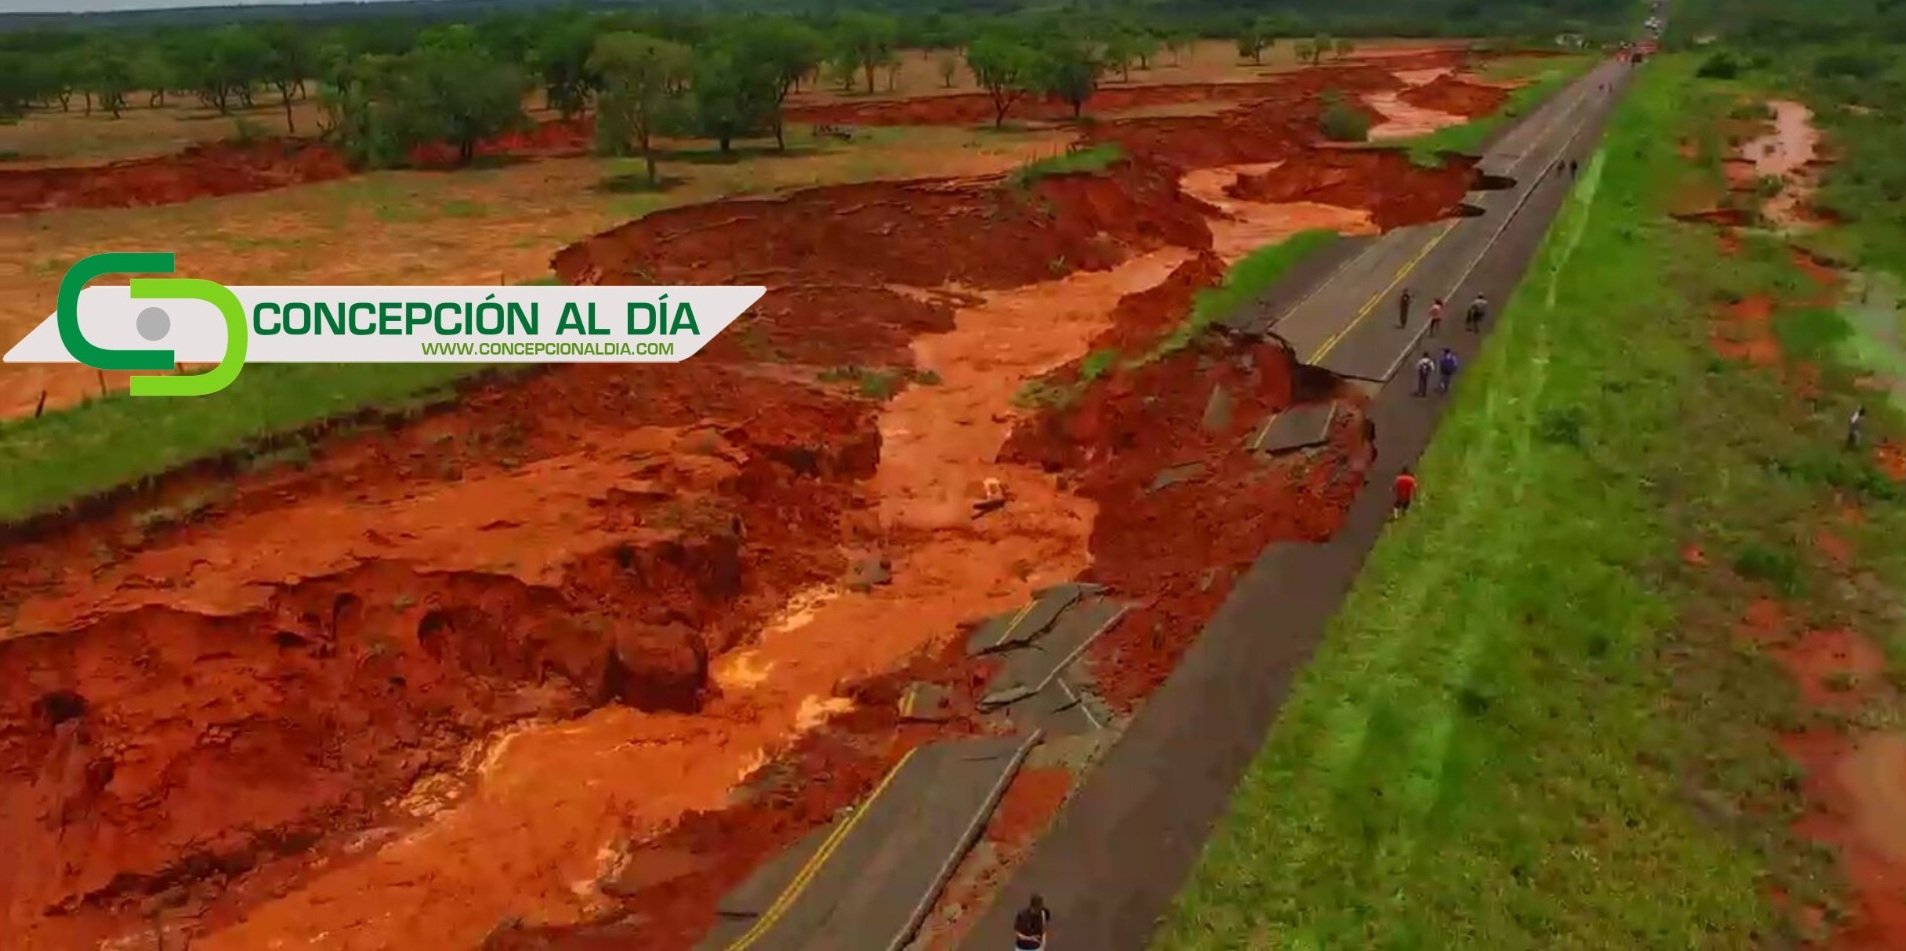 giant crack paraguay, giant crack paraguay video, giant crack paraguay photo, giant crack paraguay picture, route III destroyed by overflow, route swallowed in Paraguay, road collapse paraguay, giant crack destroys road in paraguay, Ruta III queda destrozada por desborde de arroyo